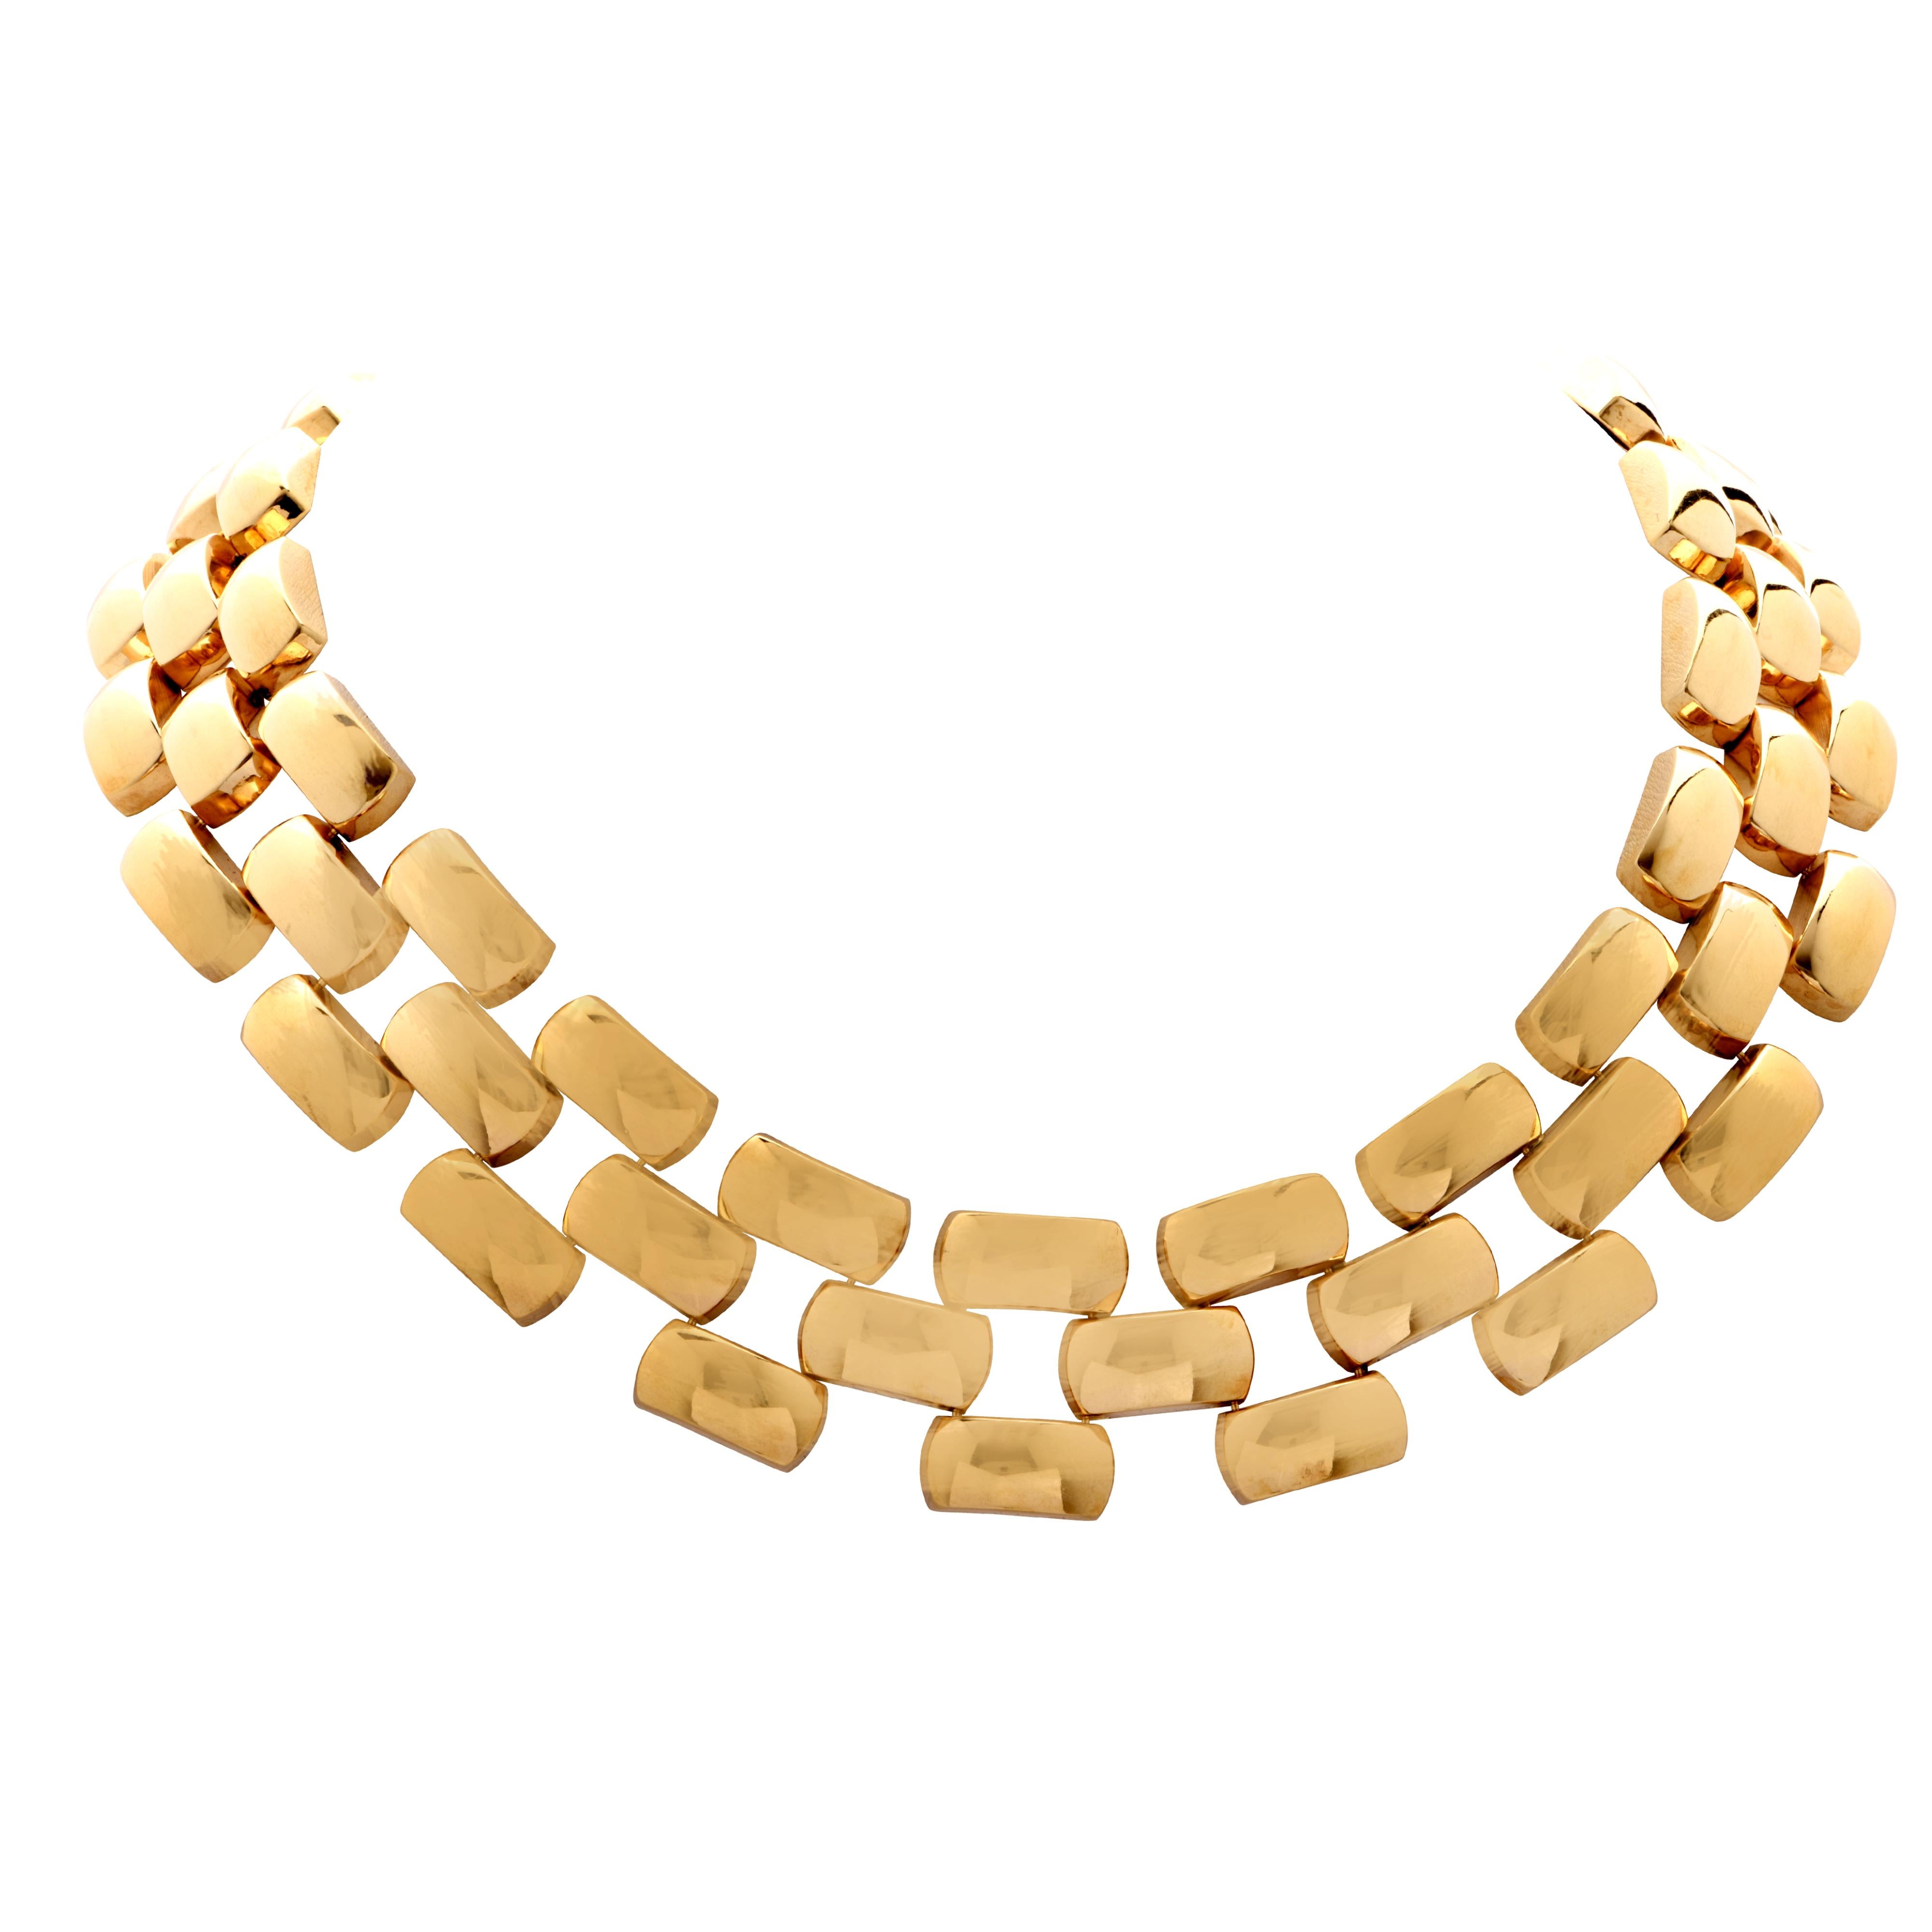 Striking 18 Karat yellow gold necklace made in Italy. Feel the smooth, silkiness of this necklace as it embraces and wraps luxuriously around your neck.  This elegant necklace measures over 1 inch in width and 18 inches in length. It weighs 103.4